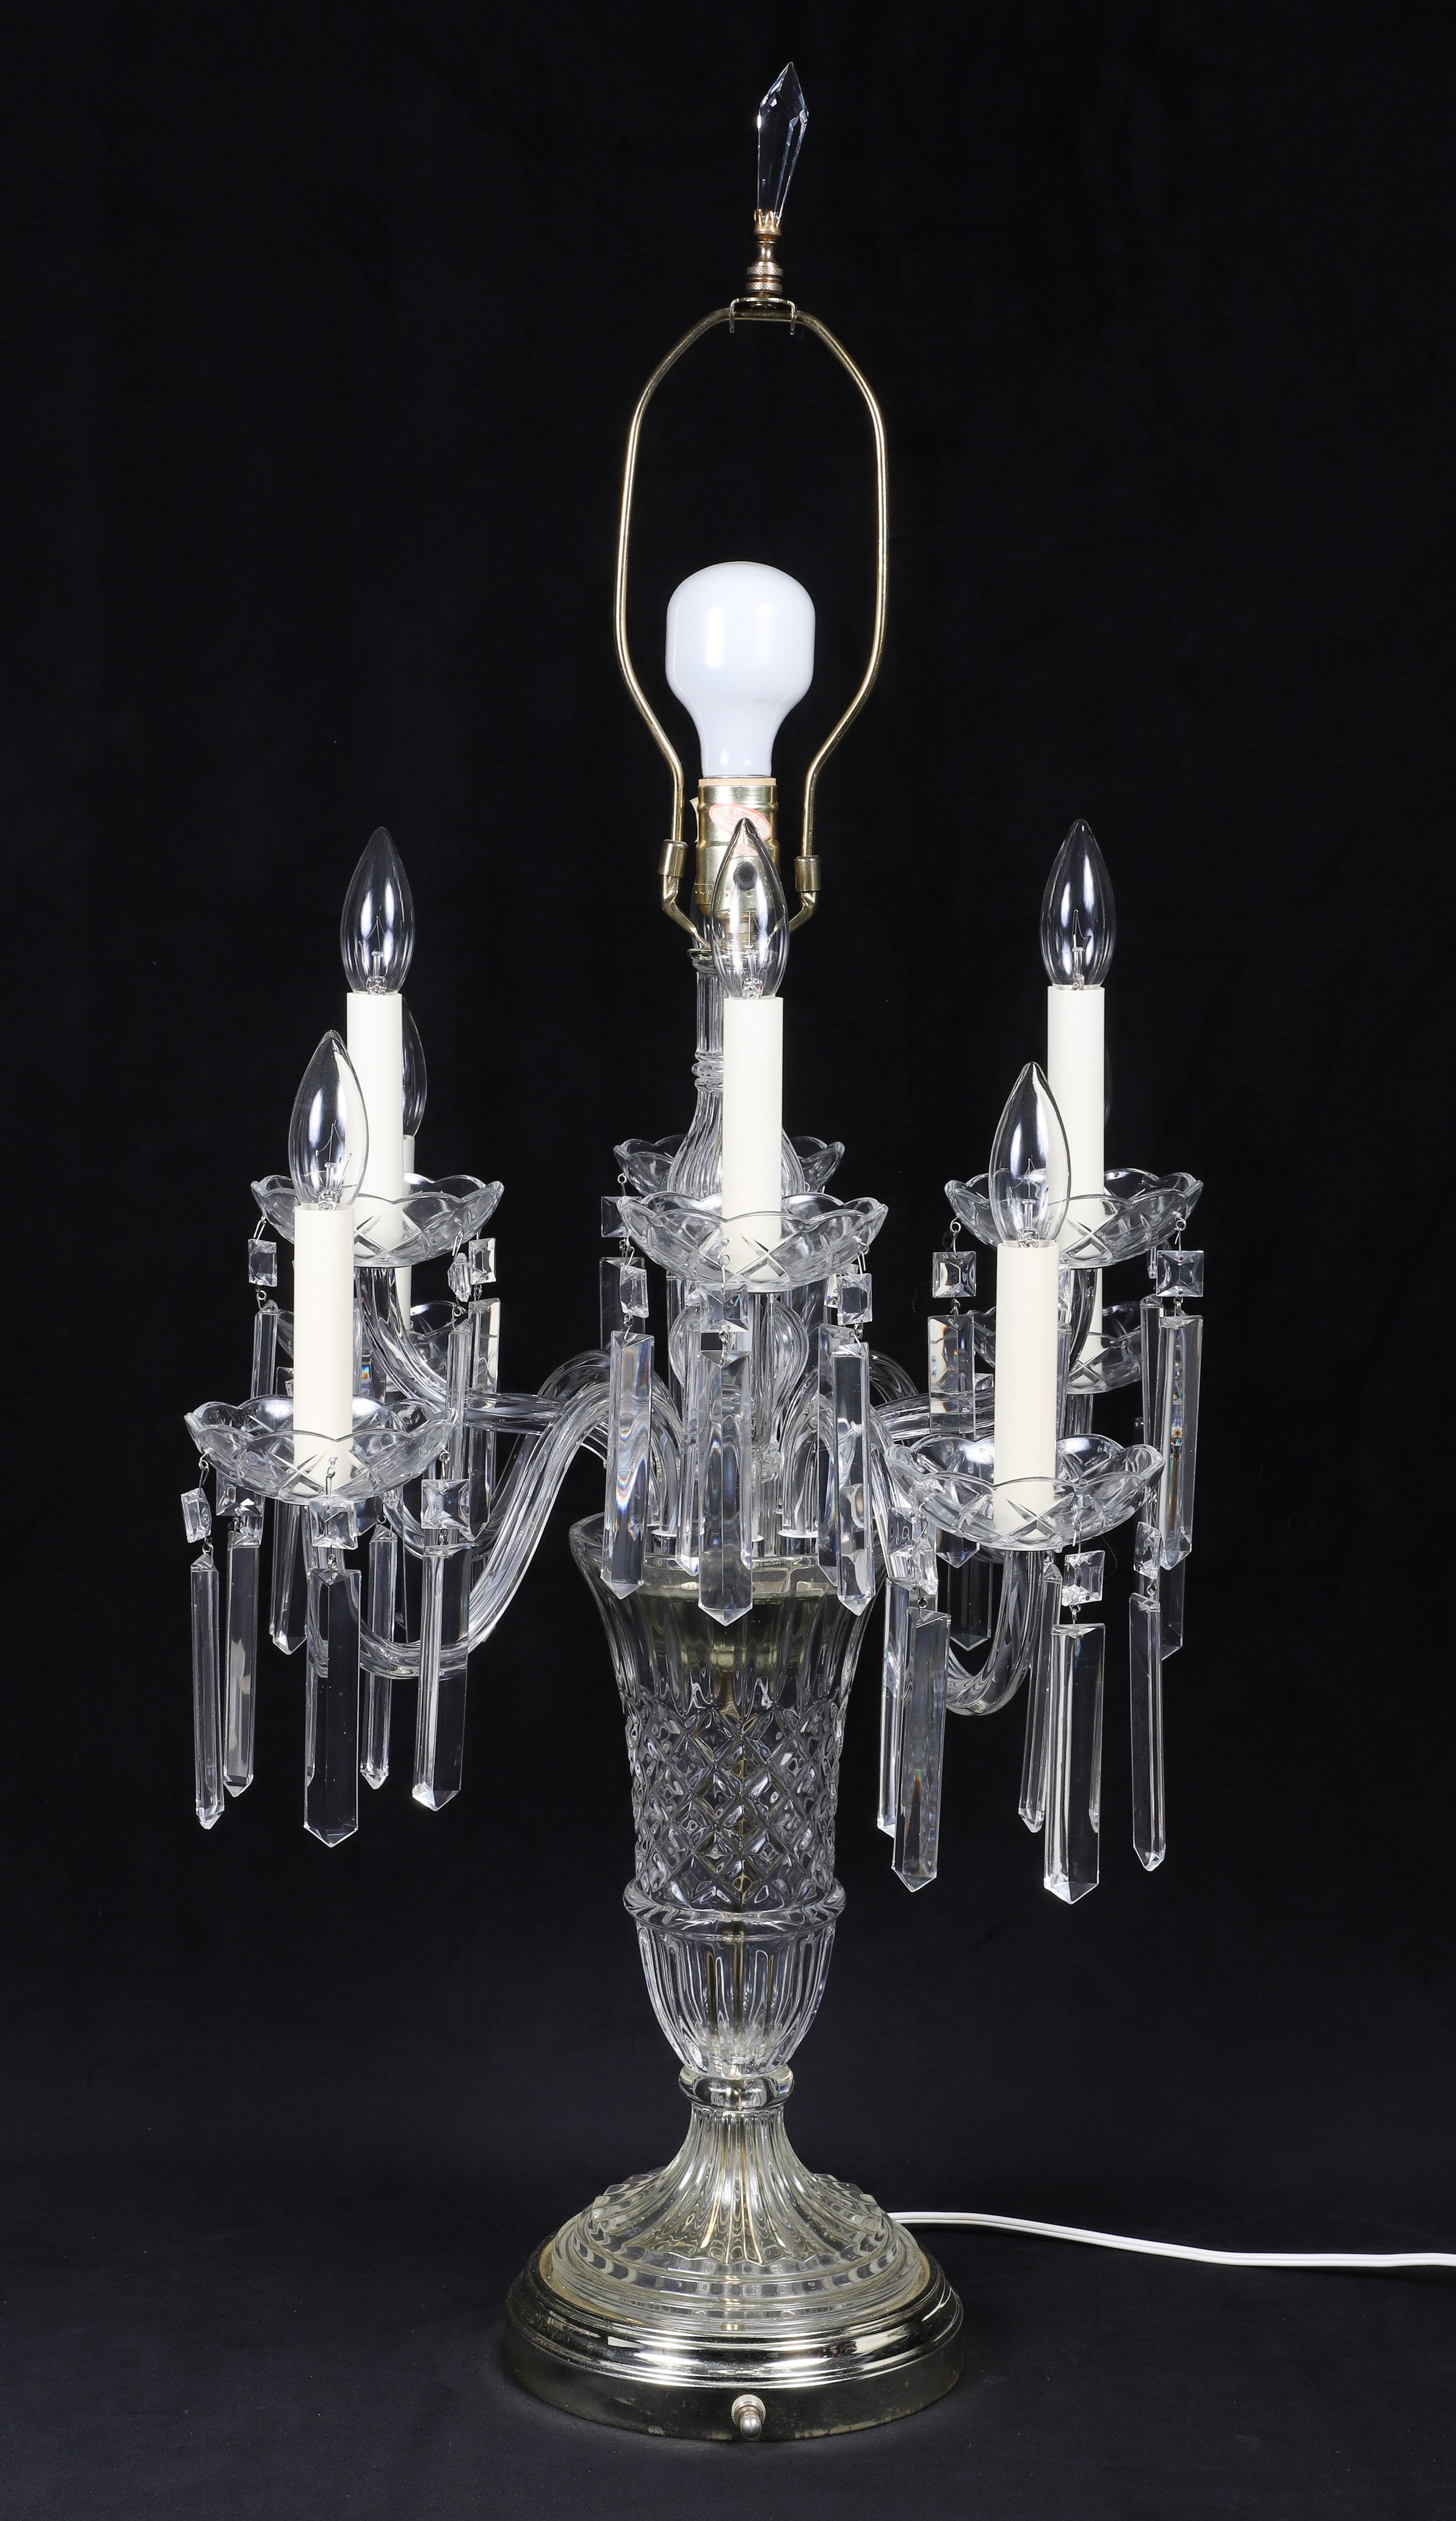 Cut glass candelabra table lamp with